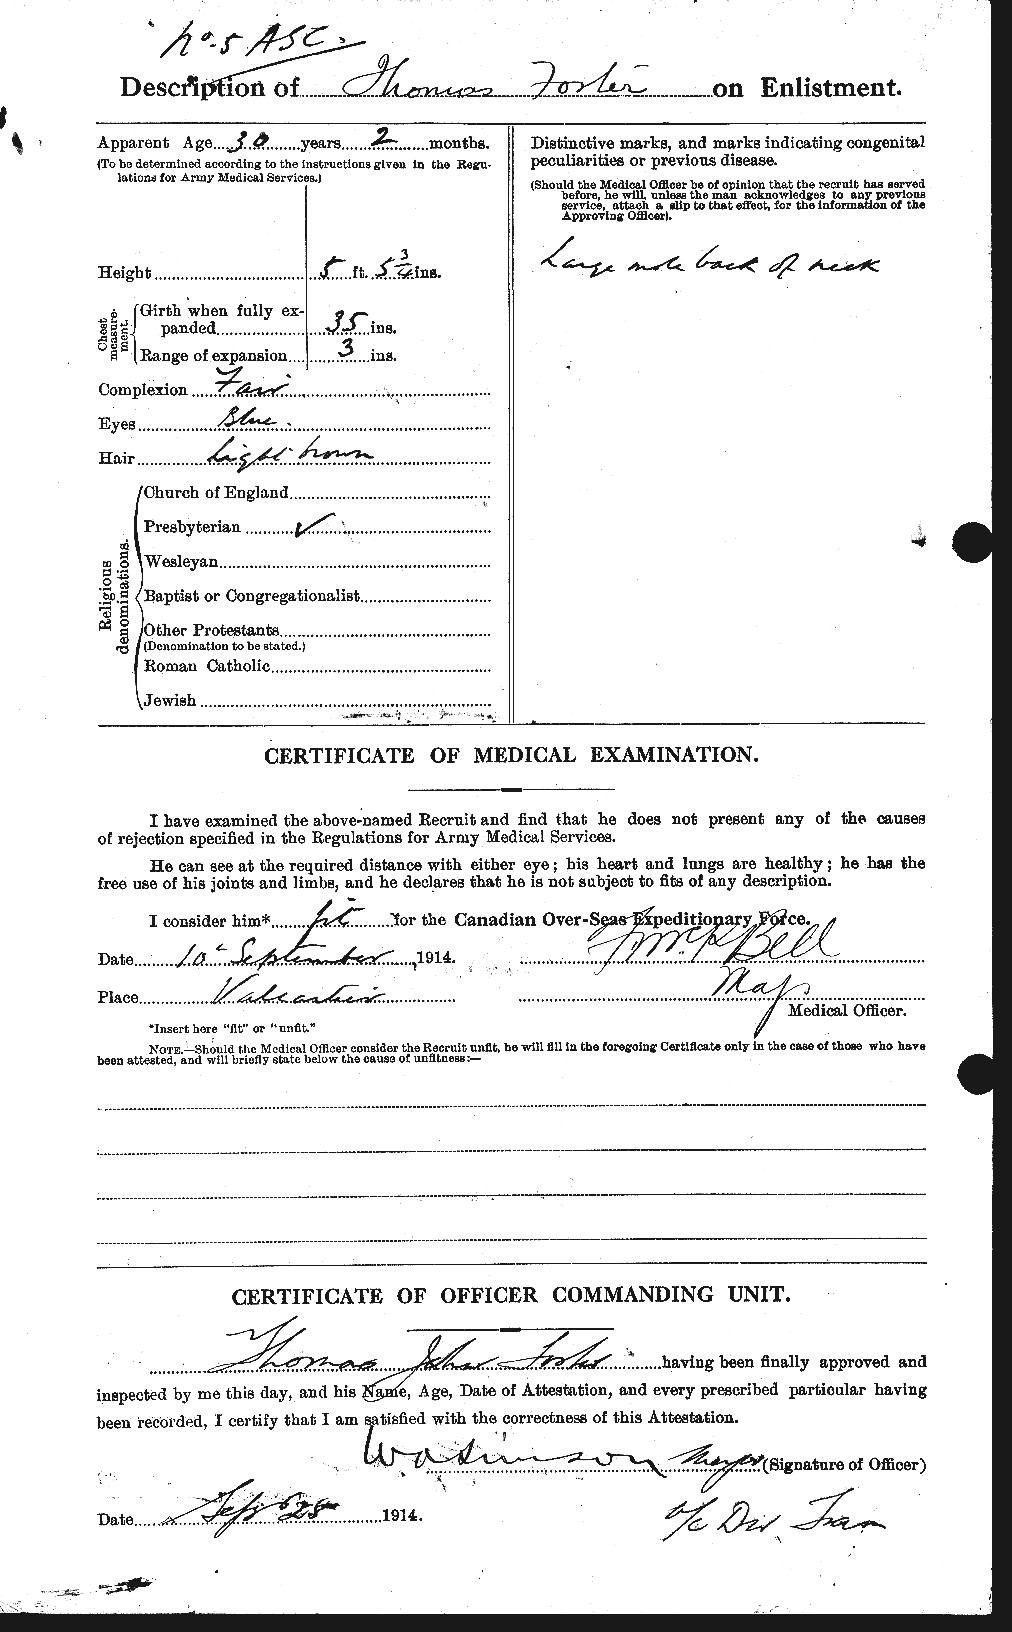 Personnel Records of the First World War - CEF 335242b